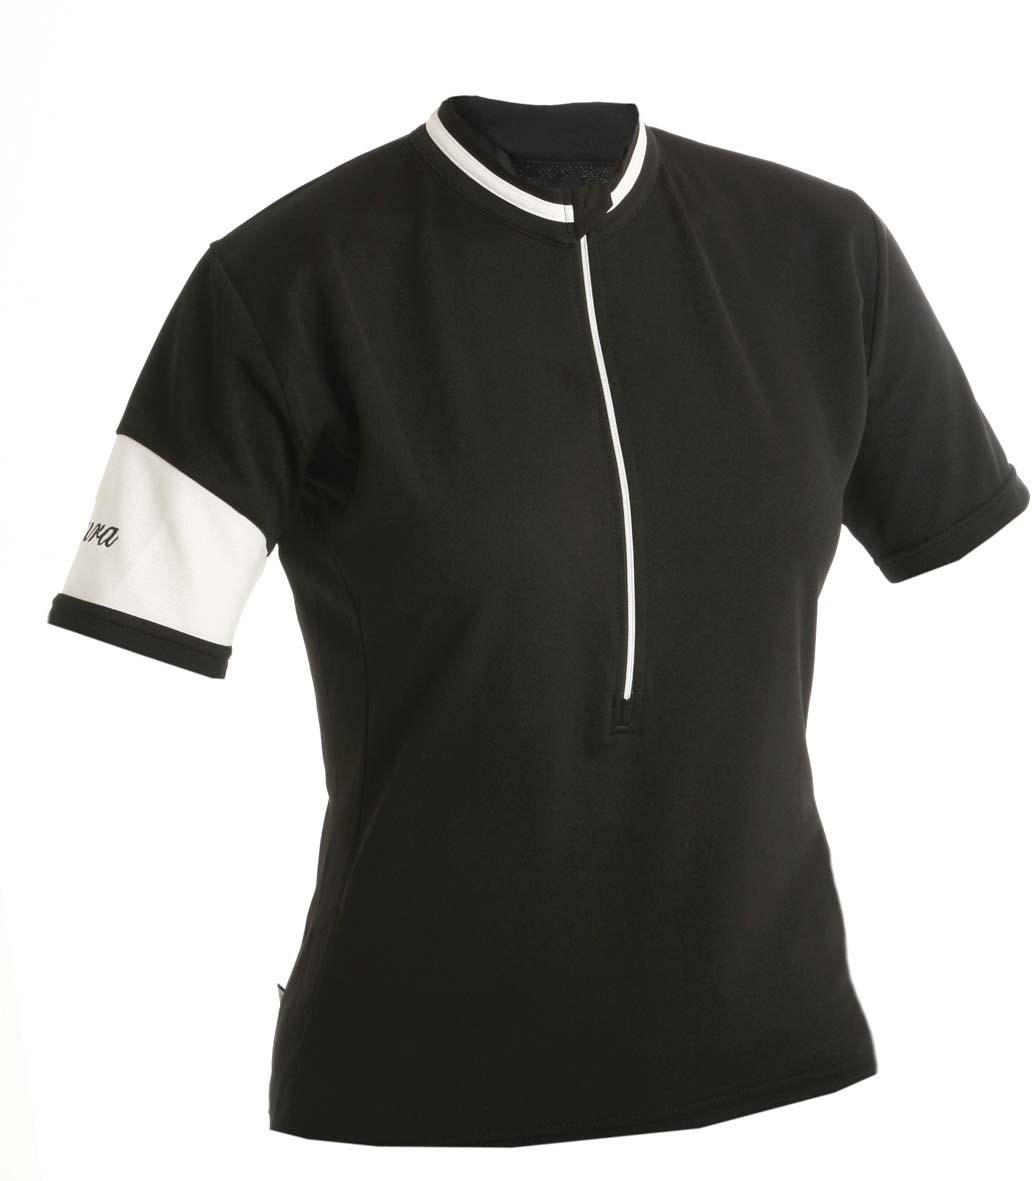 Altura Classic Womens Short Sleeve Jersey 2013 product image